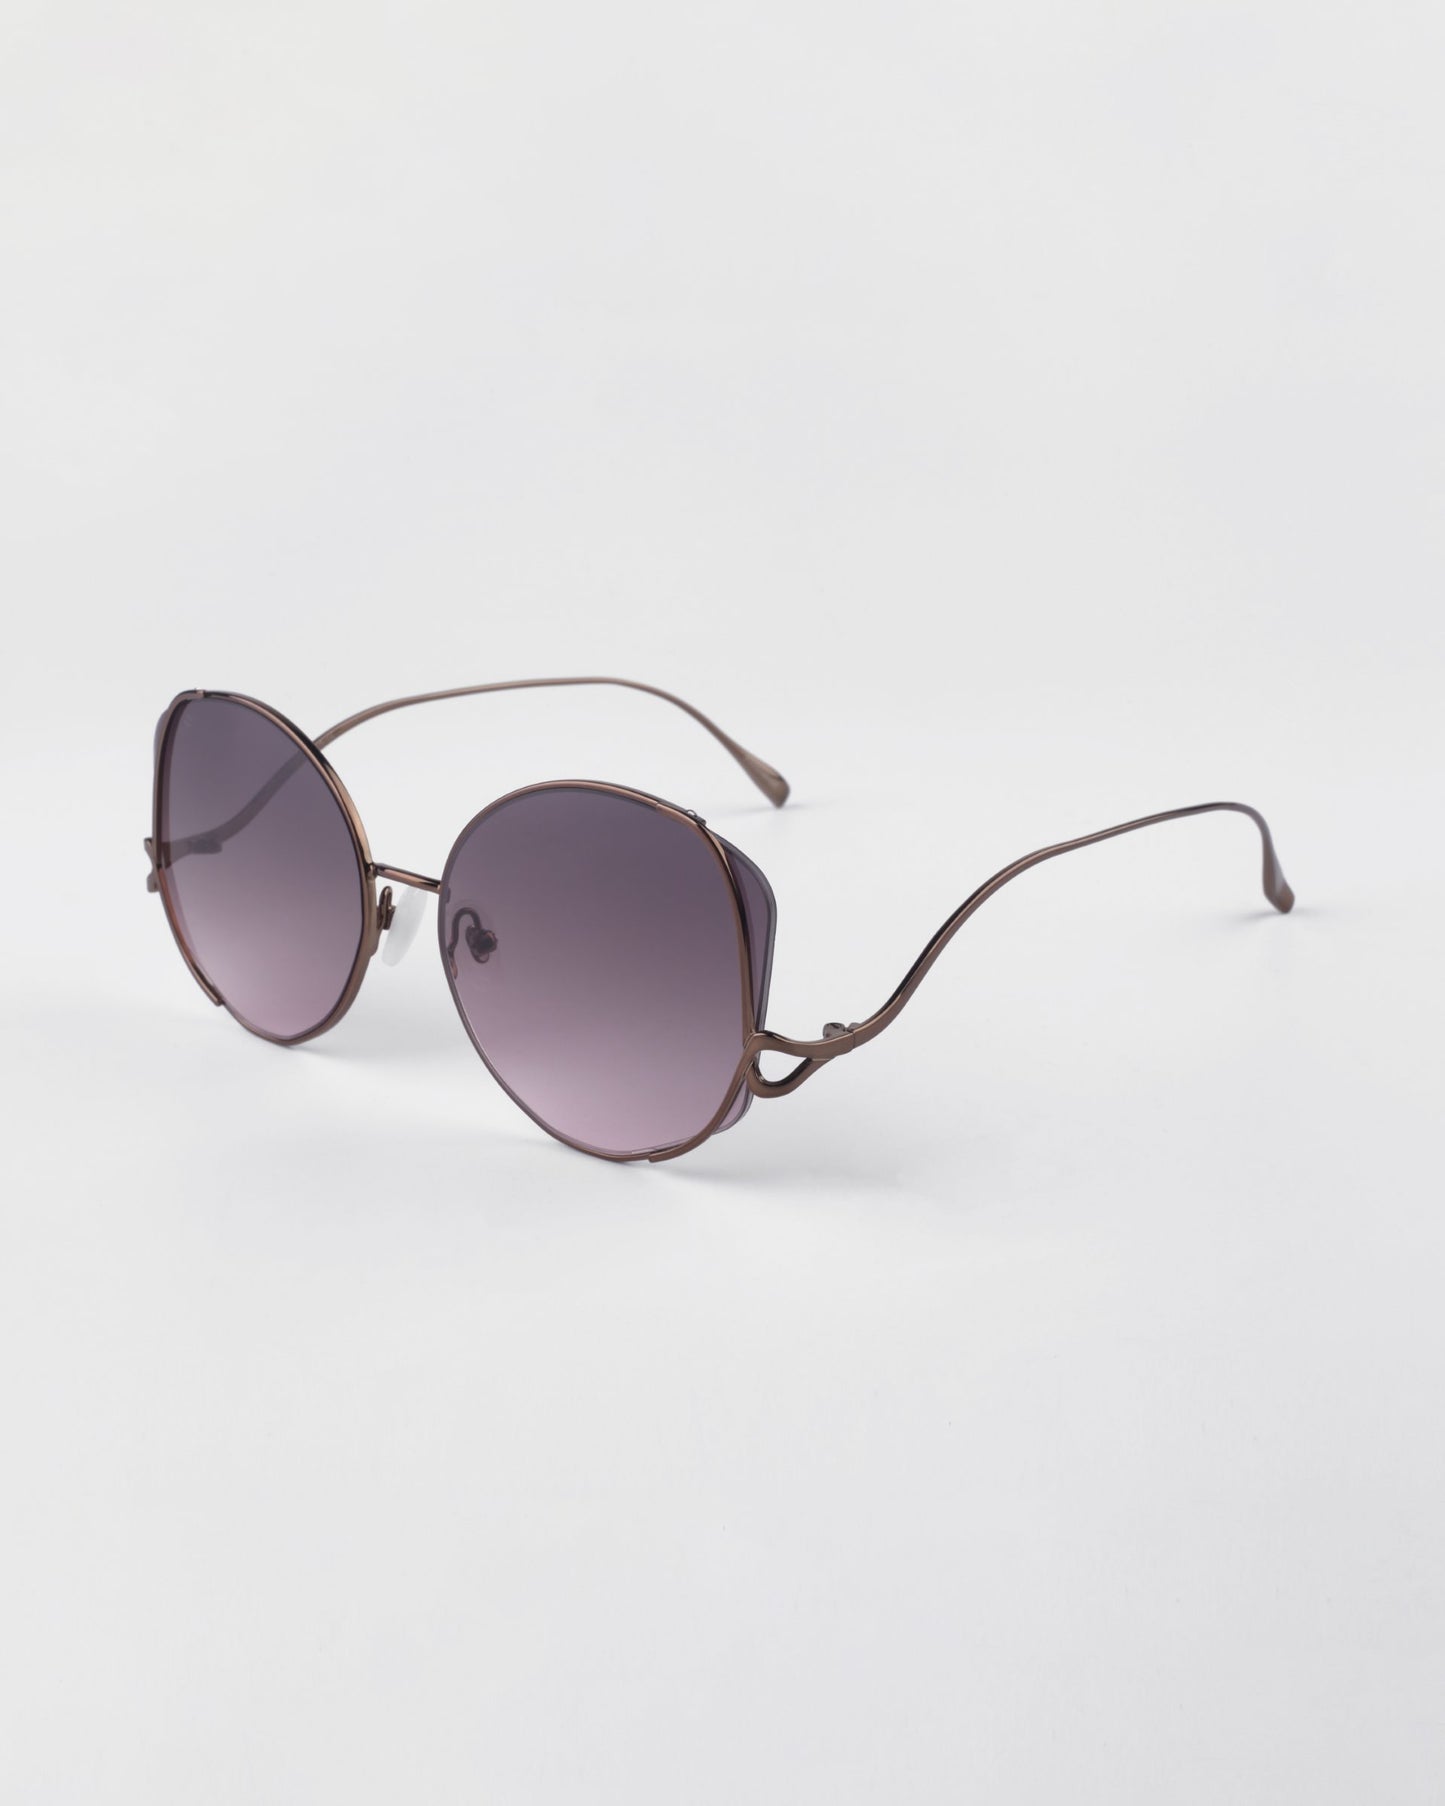 For Art's Sake Canvas sunglasses in Rose. Side view of glasses showing the rose gold metal frames and round shape. 